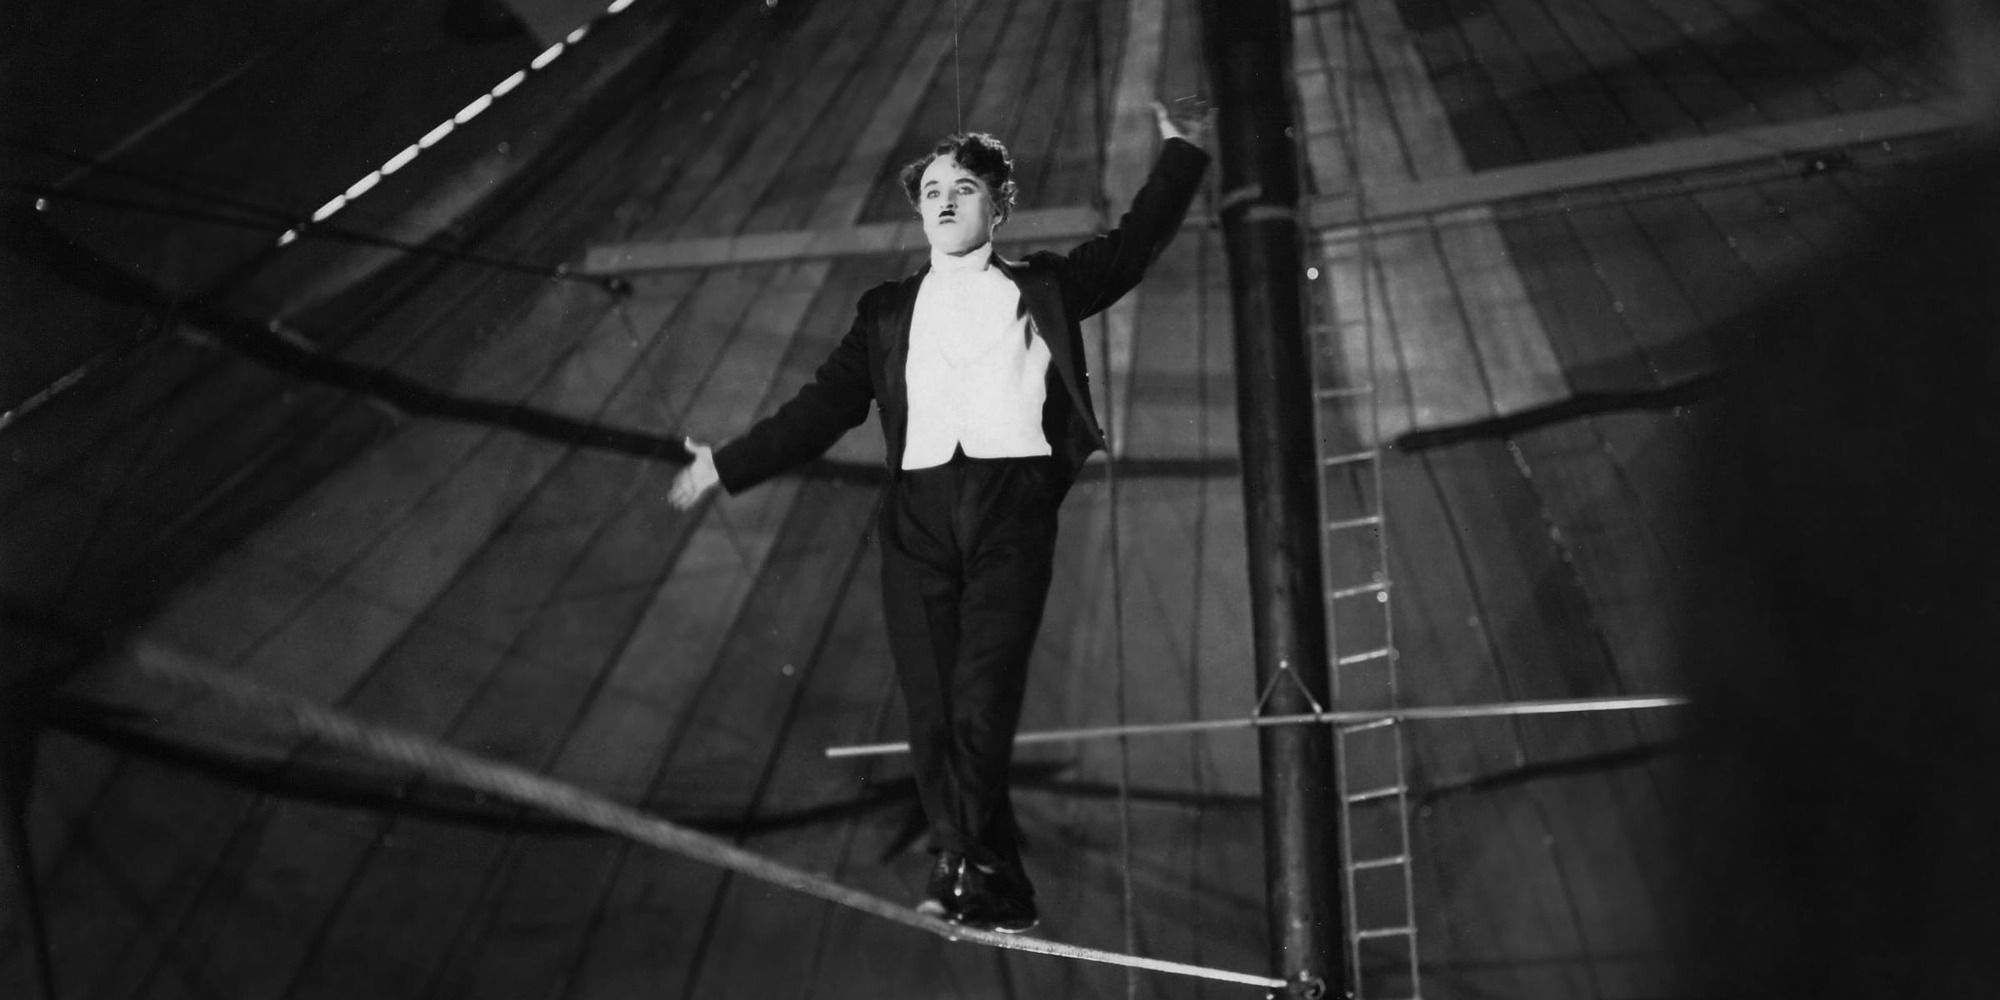 The Tramp walking the tightrope in a circus